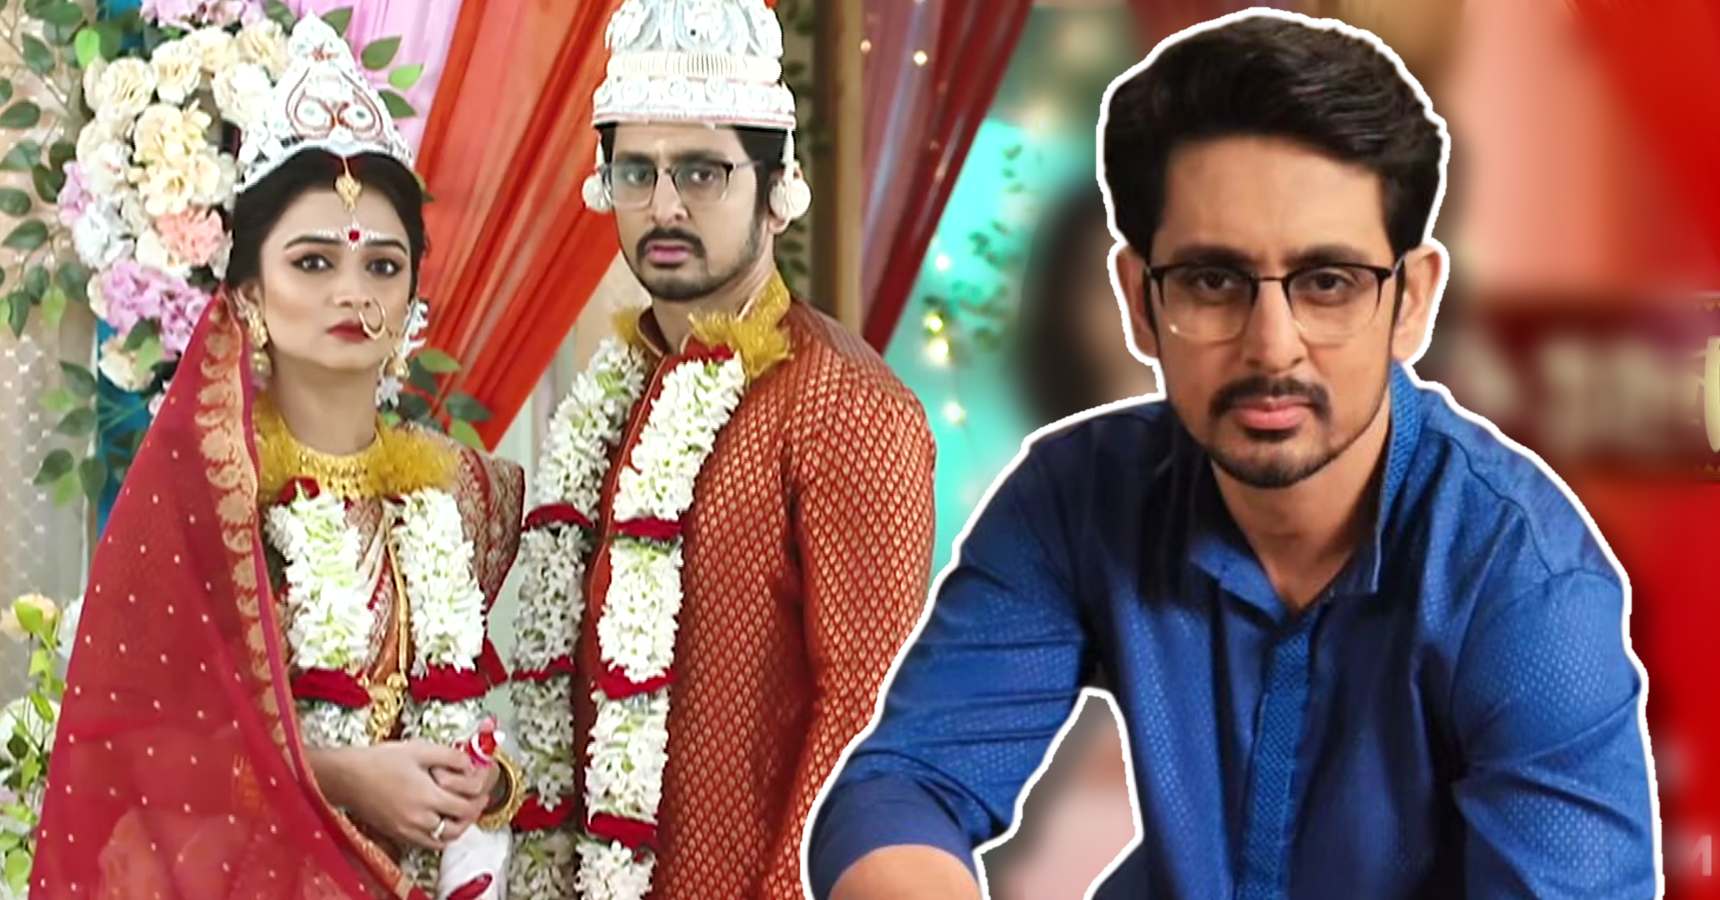 Icche Putul enging with Megh Neel Wedding truth revealed by Actor Mainakh Banerjee